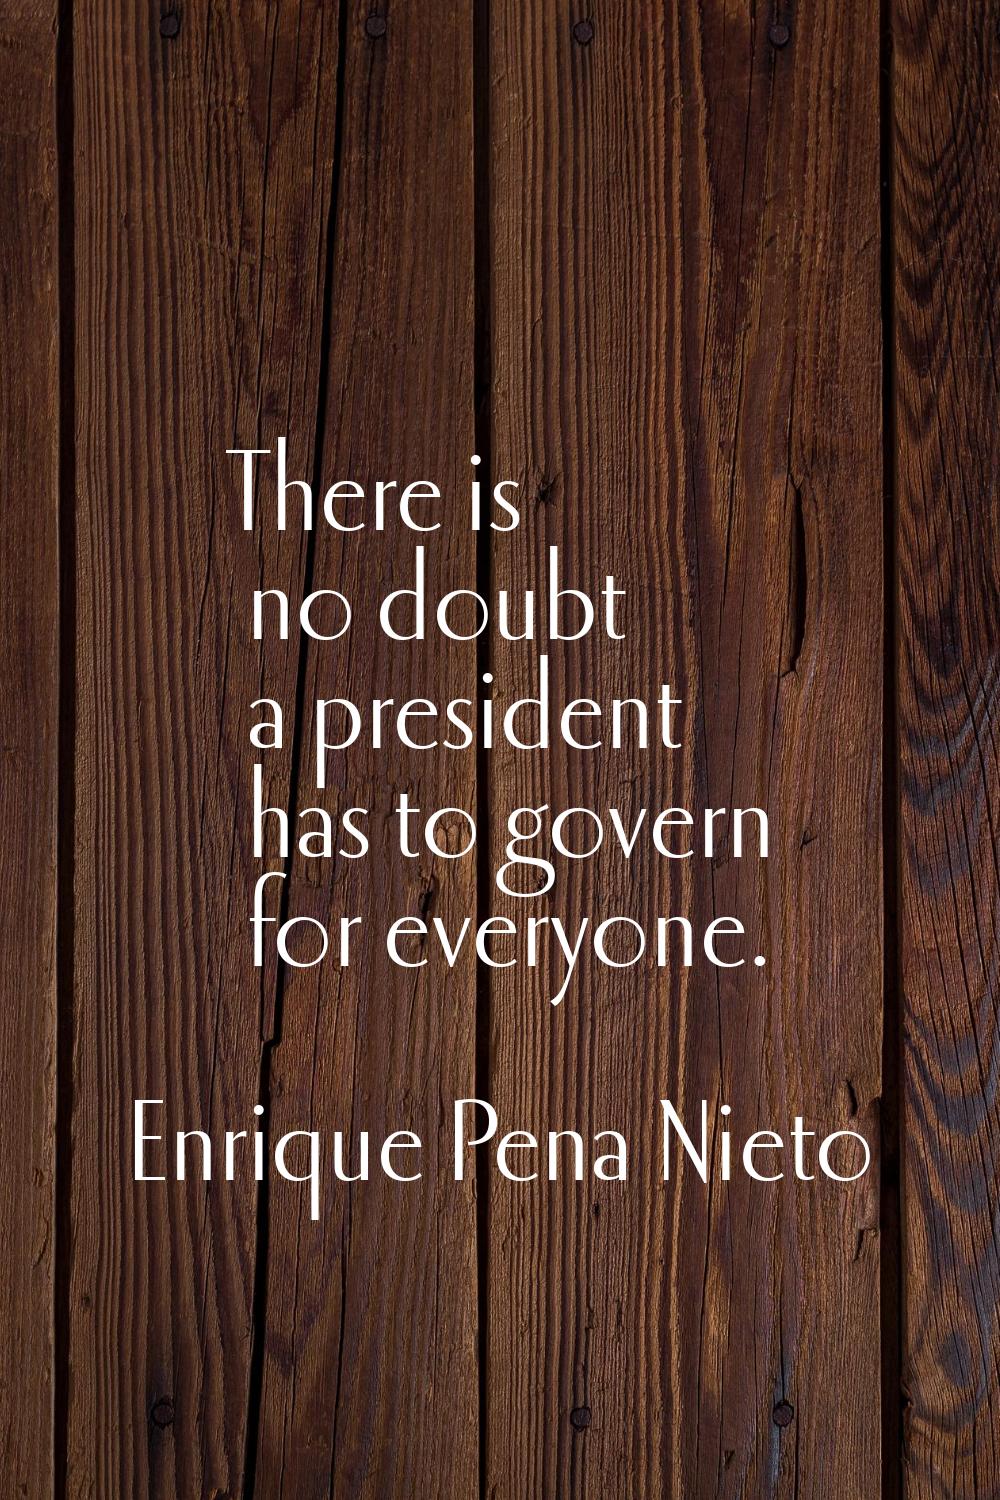 There is no doubt a president has to govern for everyone.